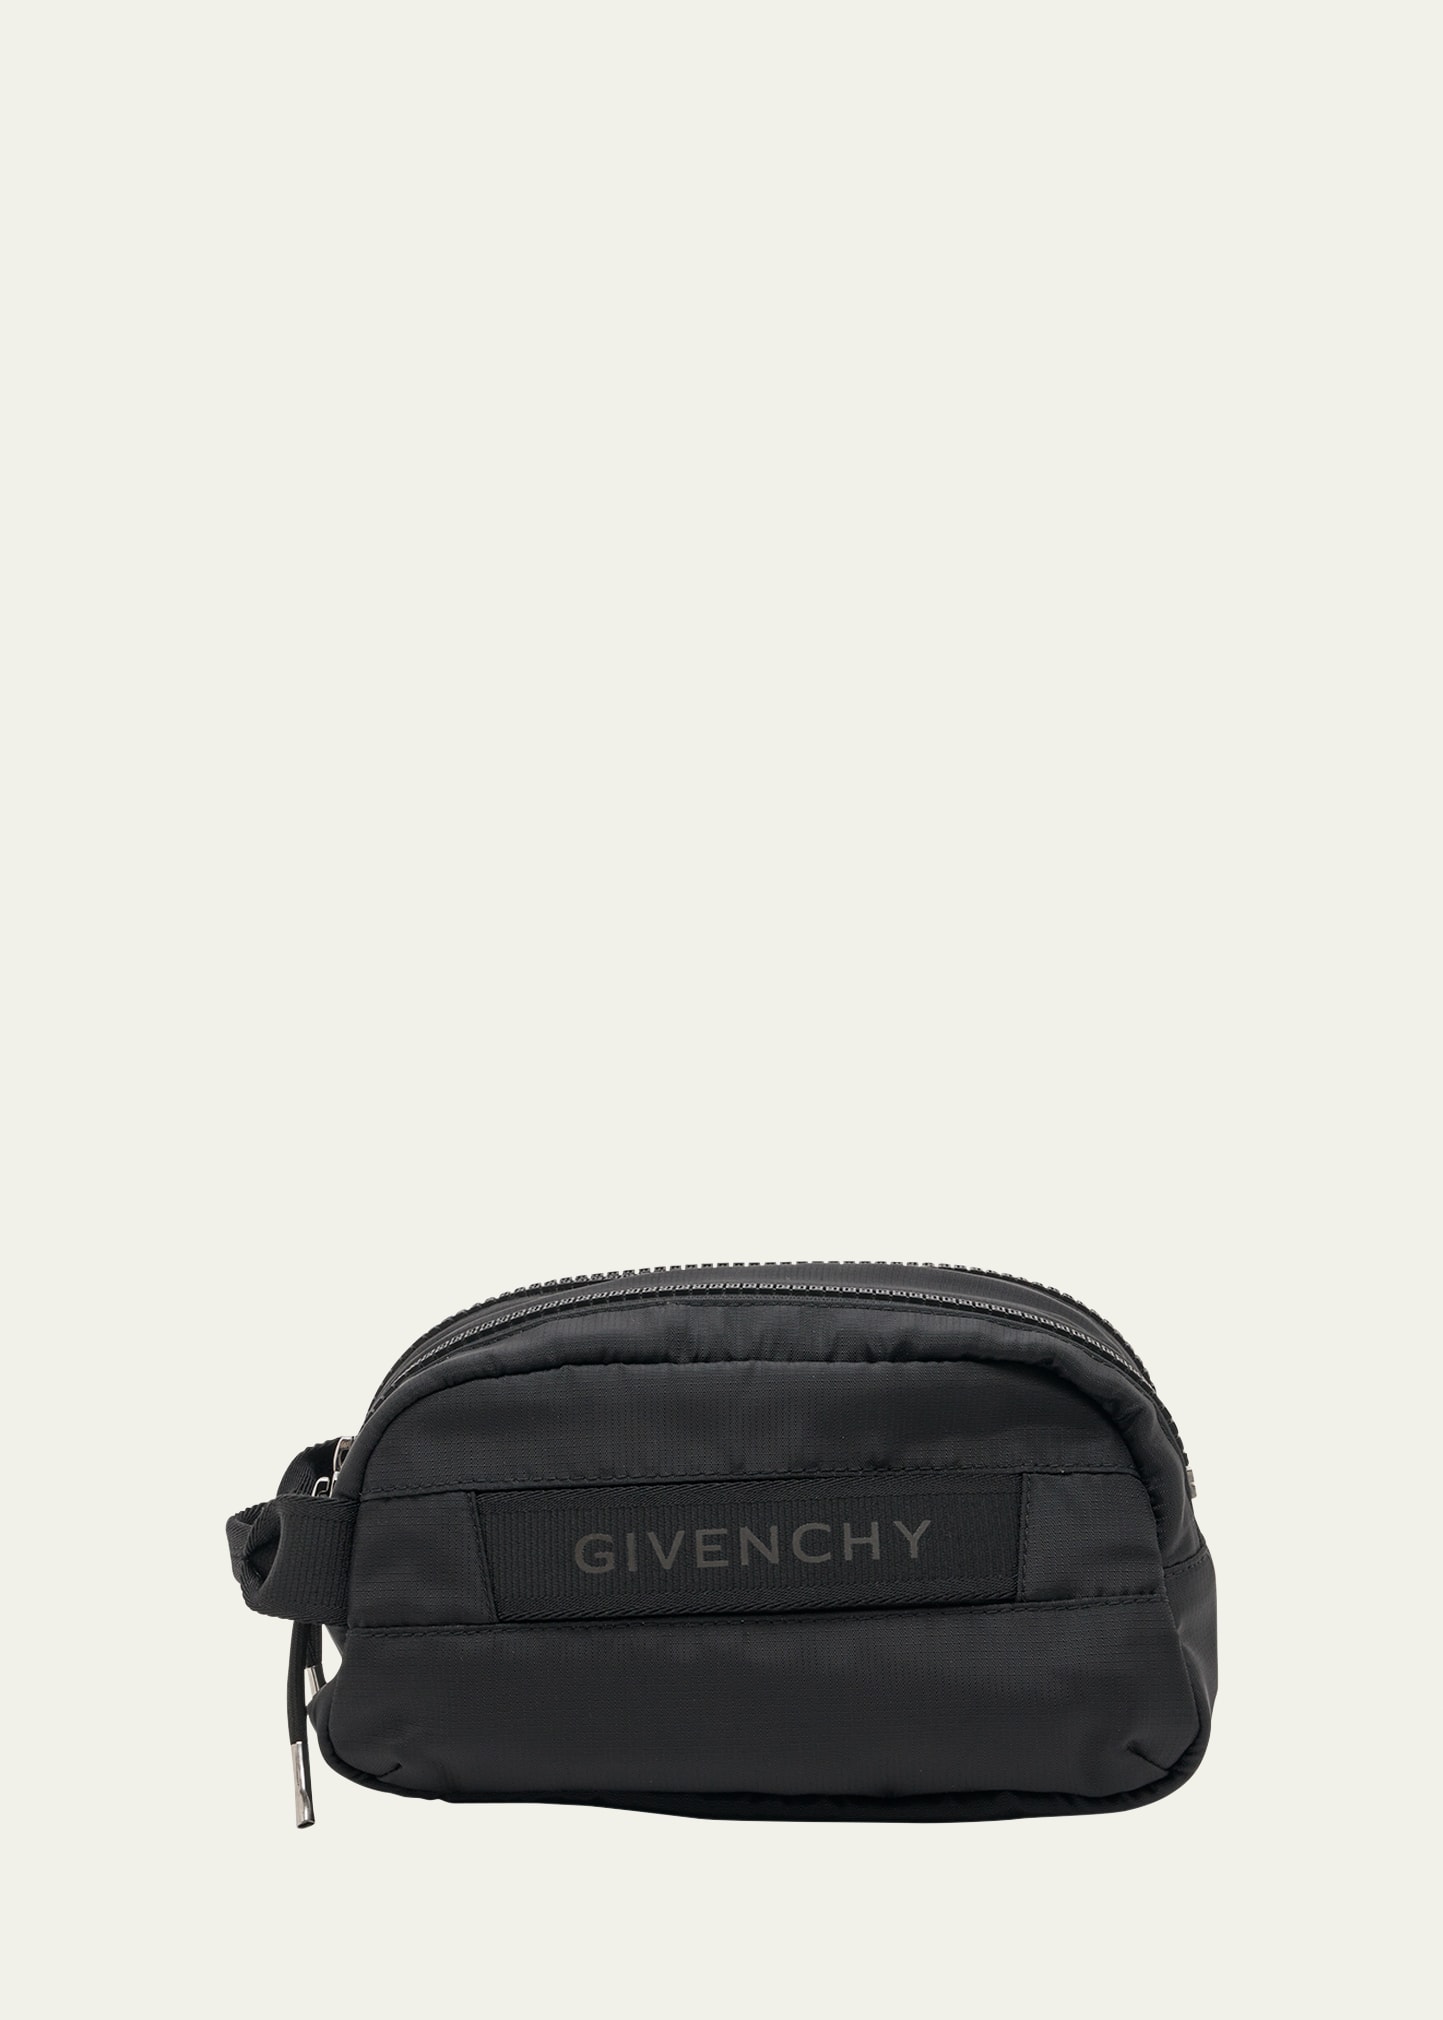 Givenchy Men's G-trek Toiletry Pouch In Black